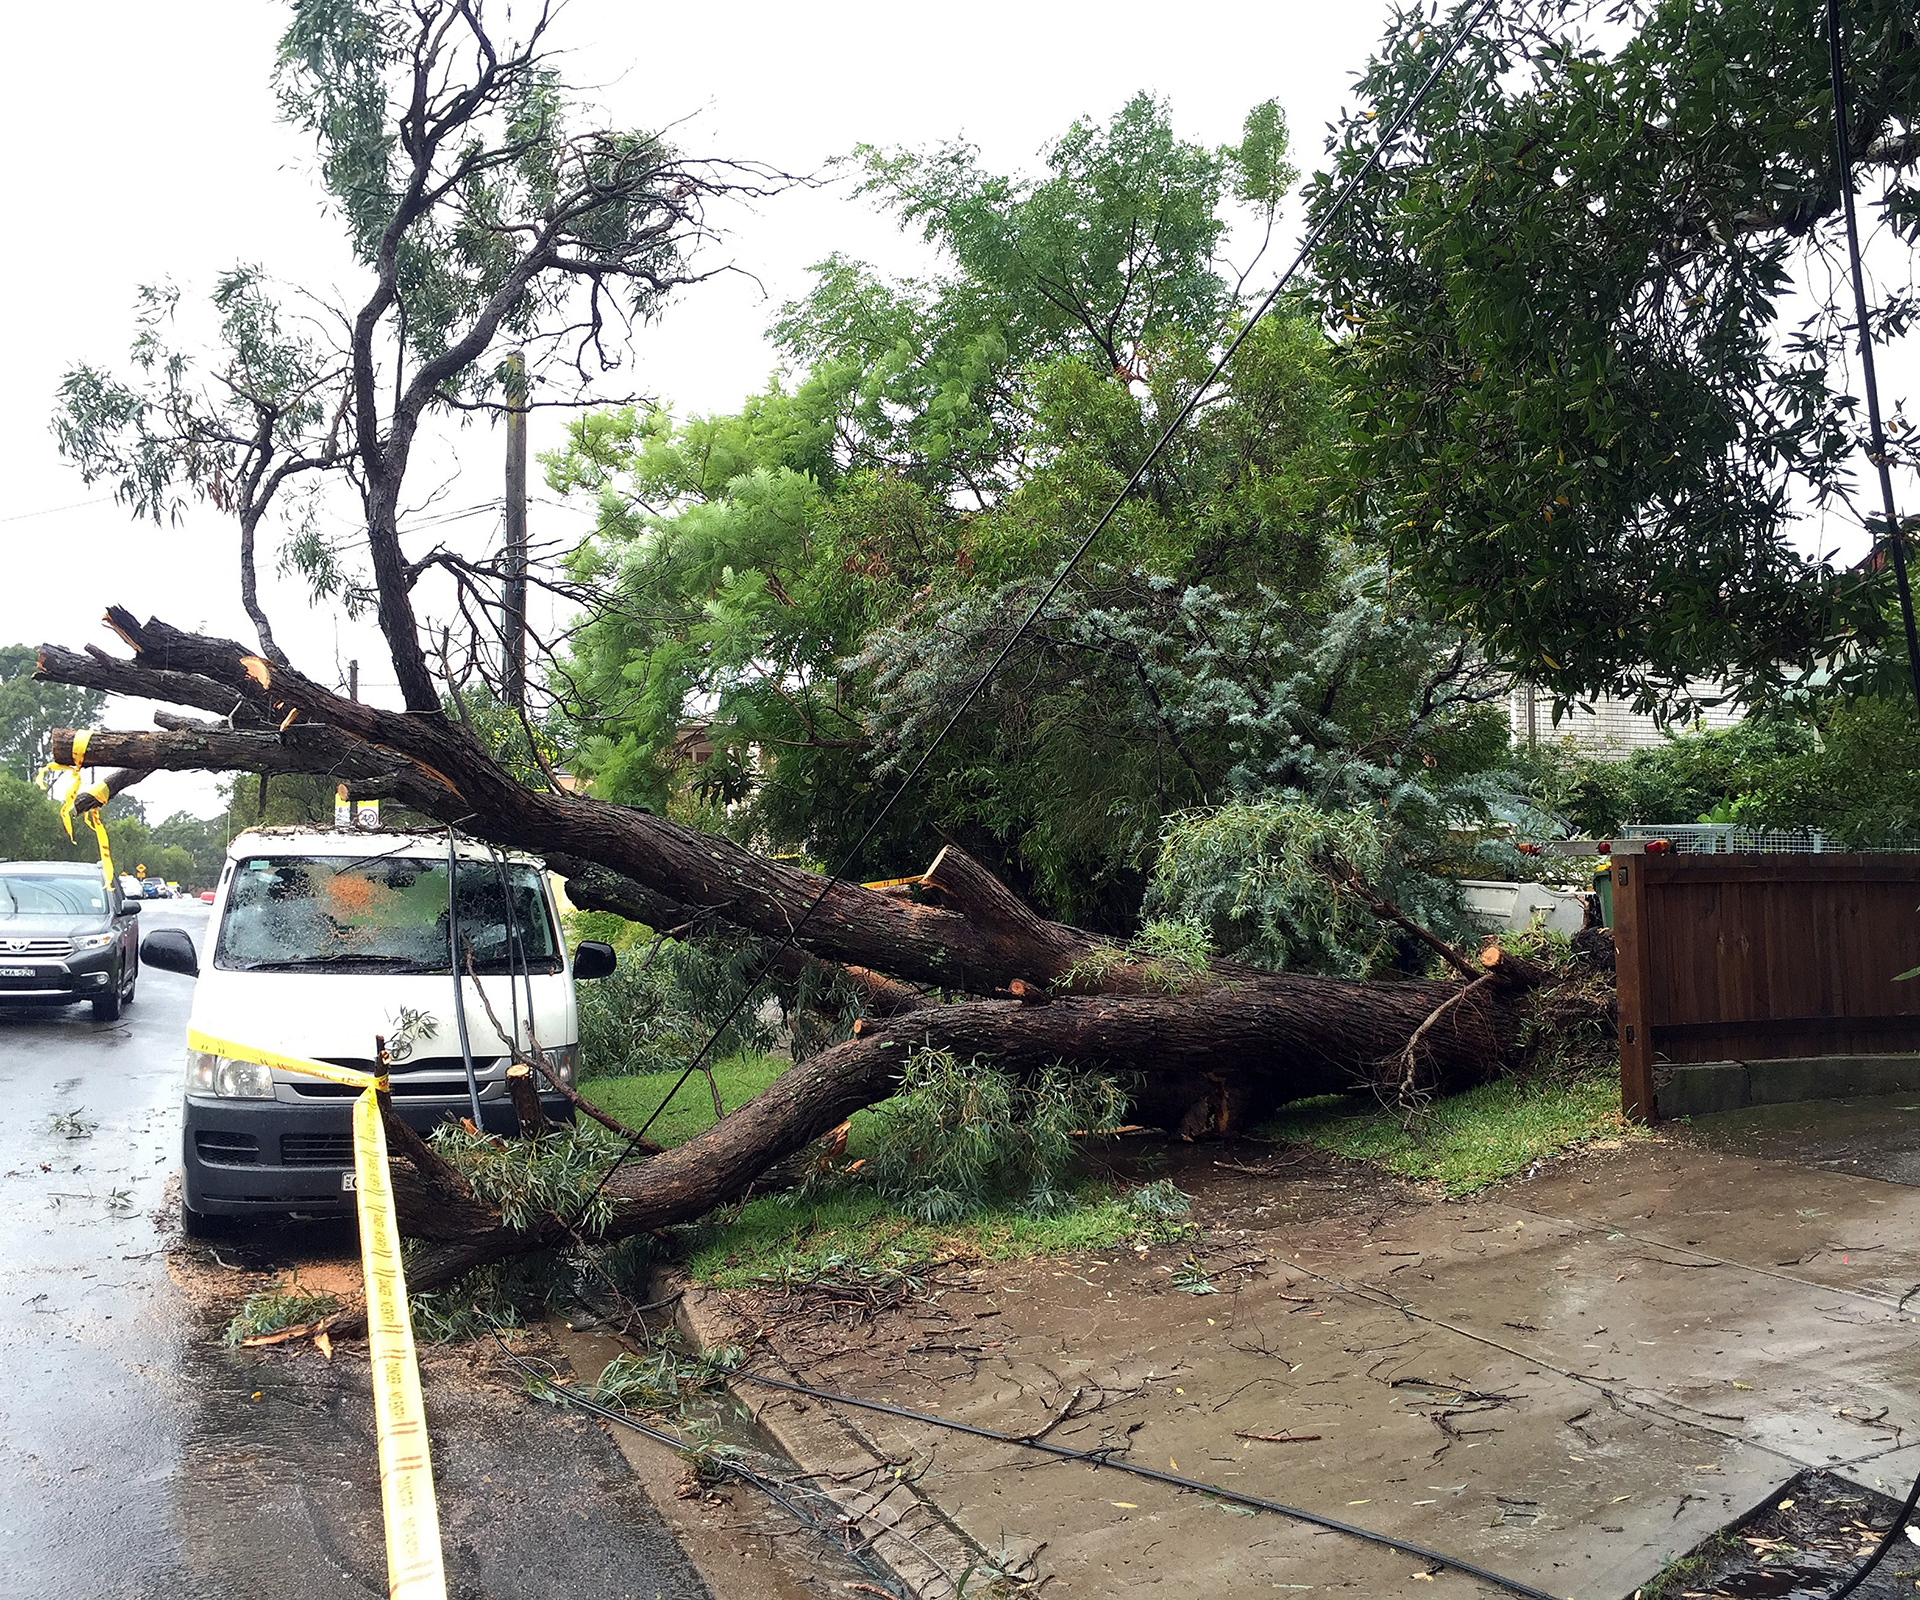 The NSW storm: what caused it and what you have to do